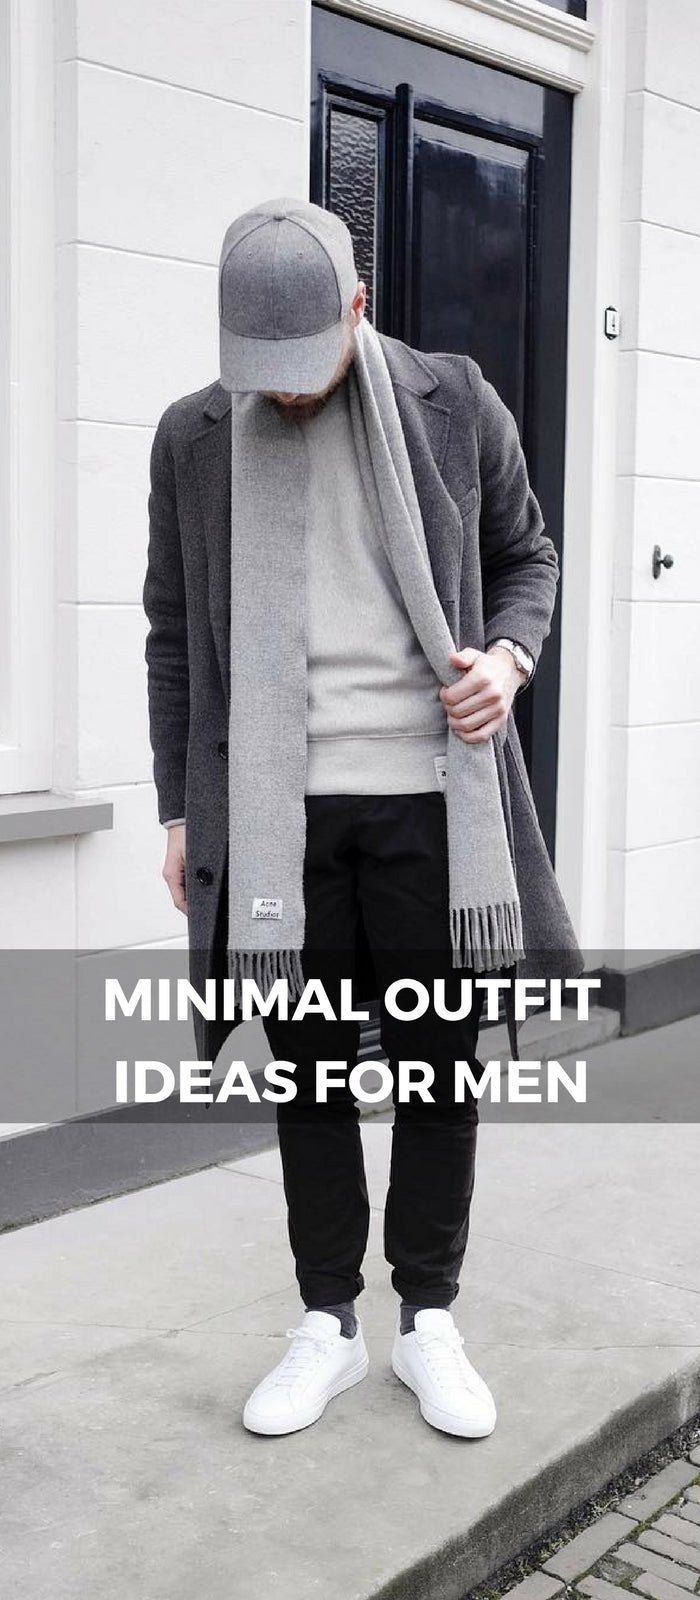 Minimal Outfit Ideas For Men 